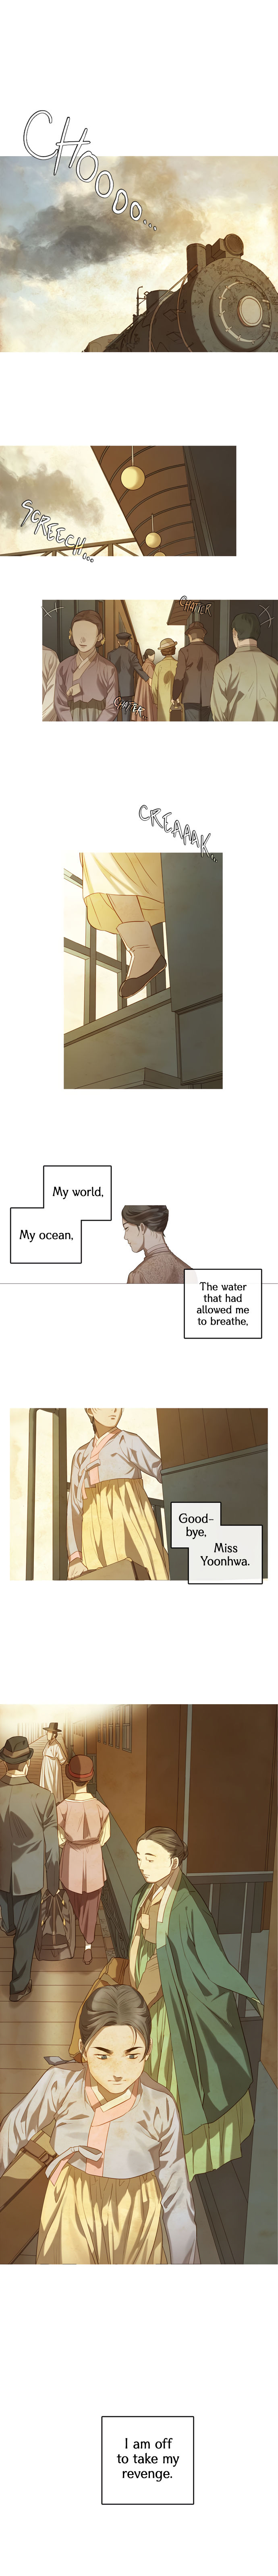 Gorae Byul - The Gyeongseong Mermaid - Chapter 15 Page 1